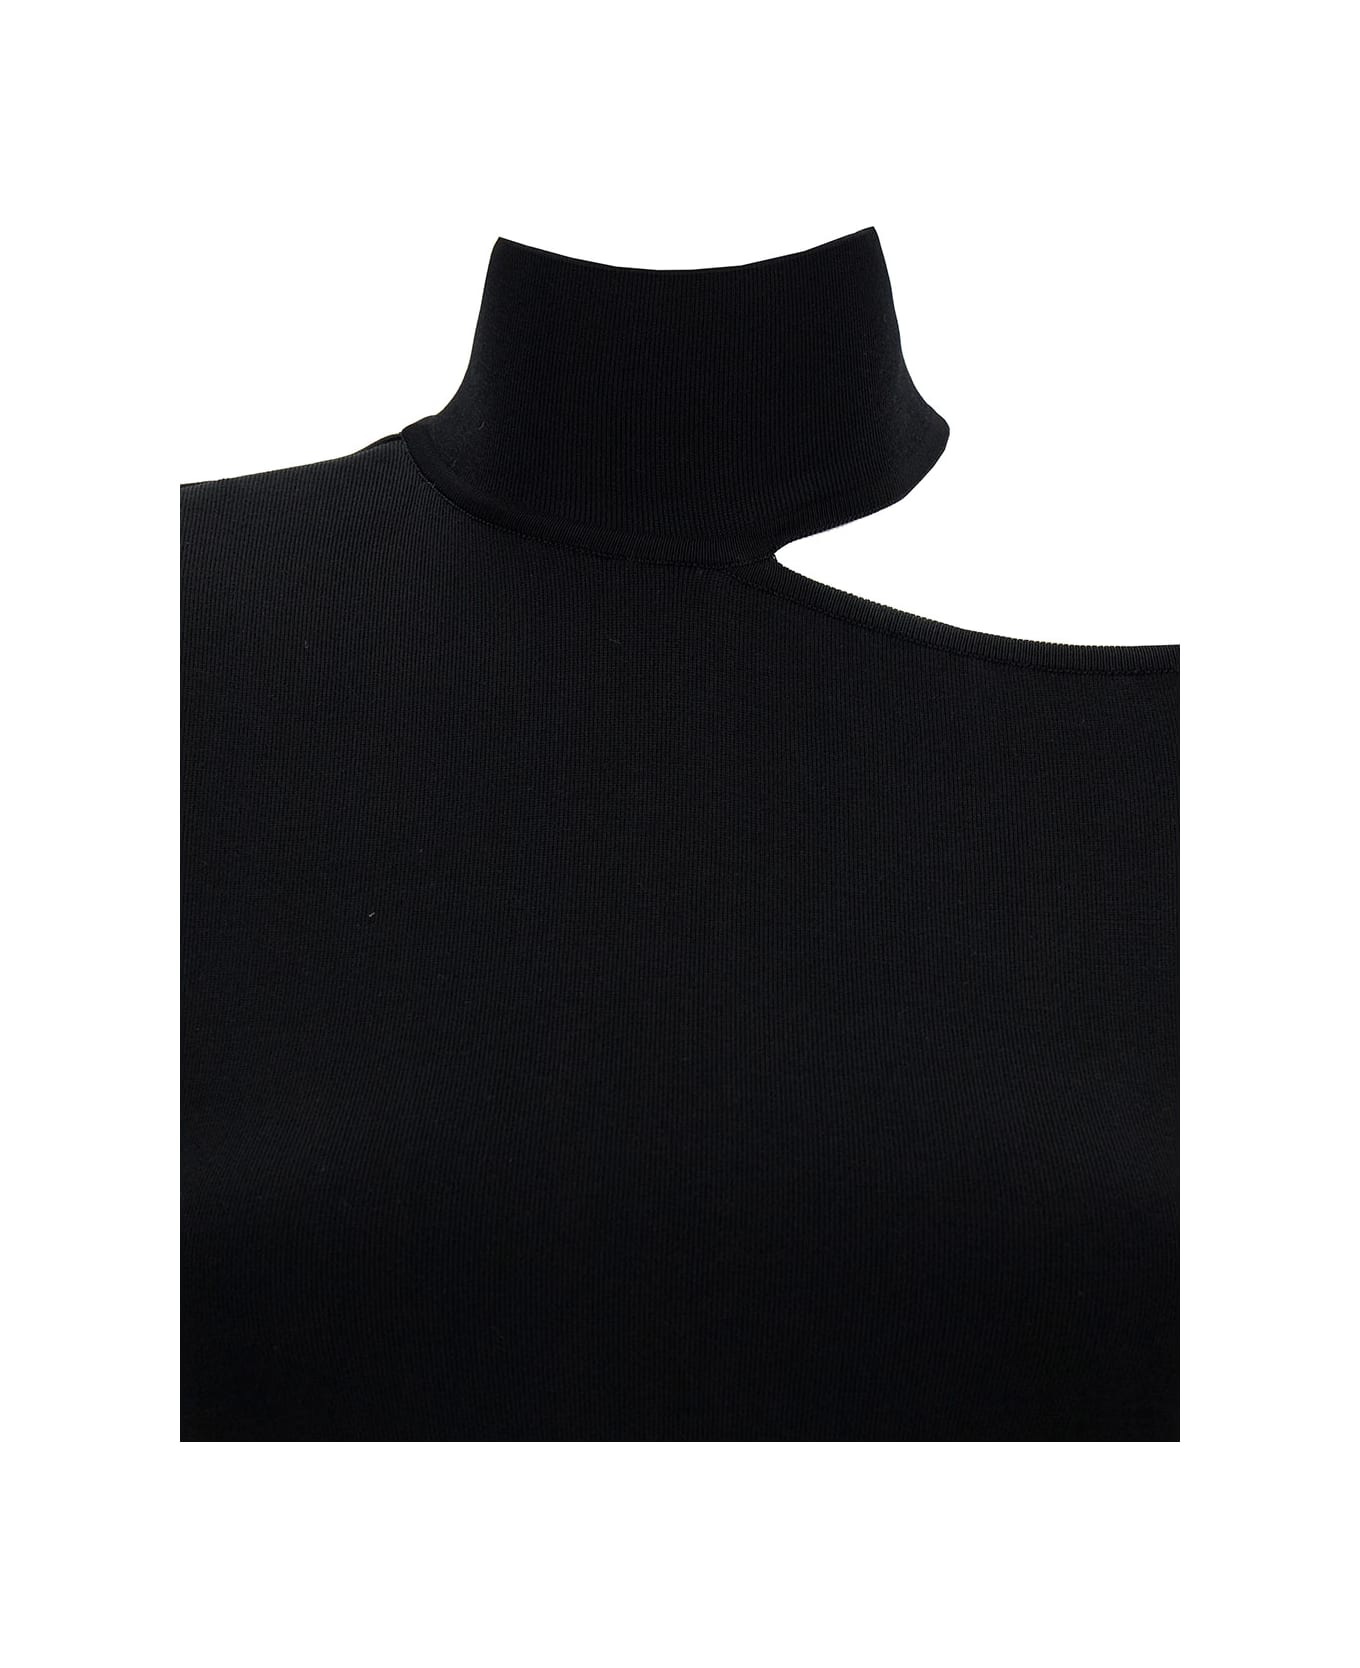 Ferragamo Midi Black Dress With Cut-out And Long Sleeve In Viscose Blend Woman - Black ワンピース＆ドレス